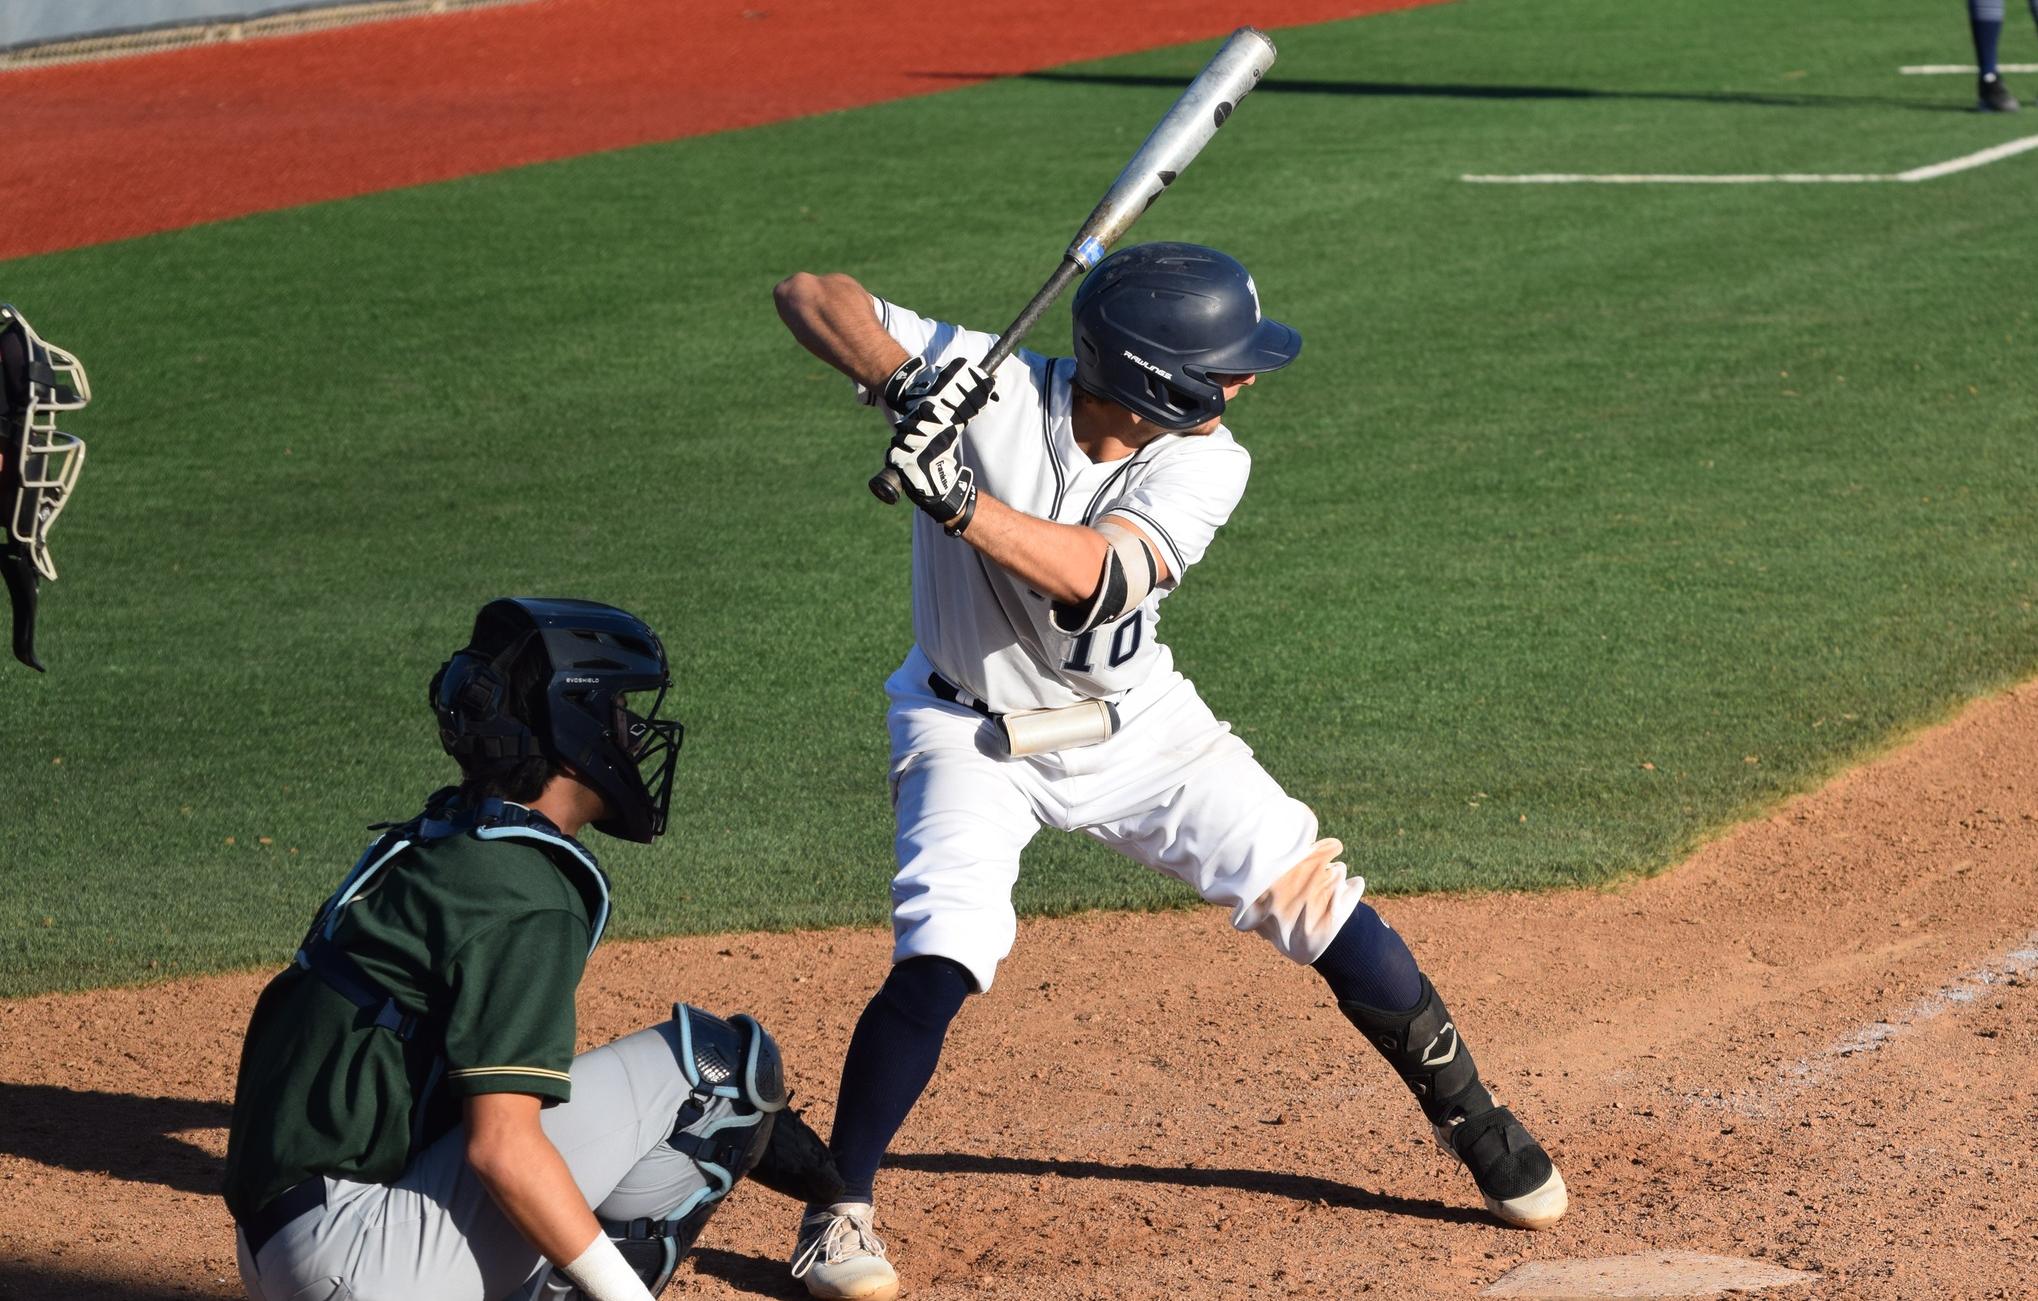 Baseball team rallies late, but falls short in game at Cypress